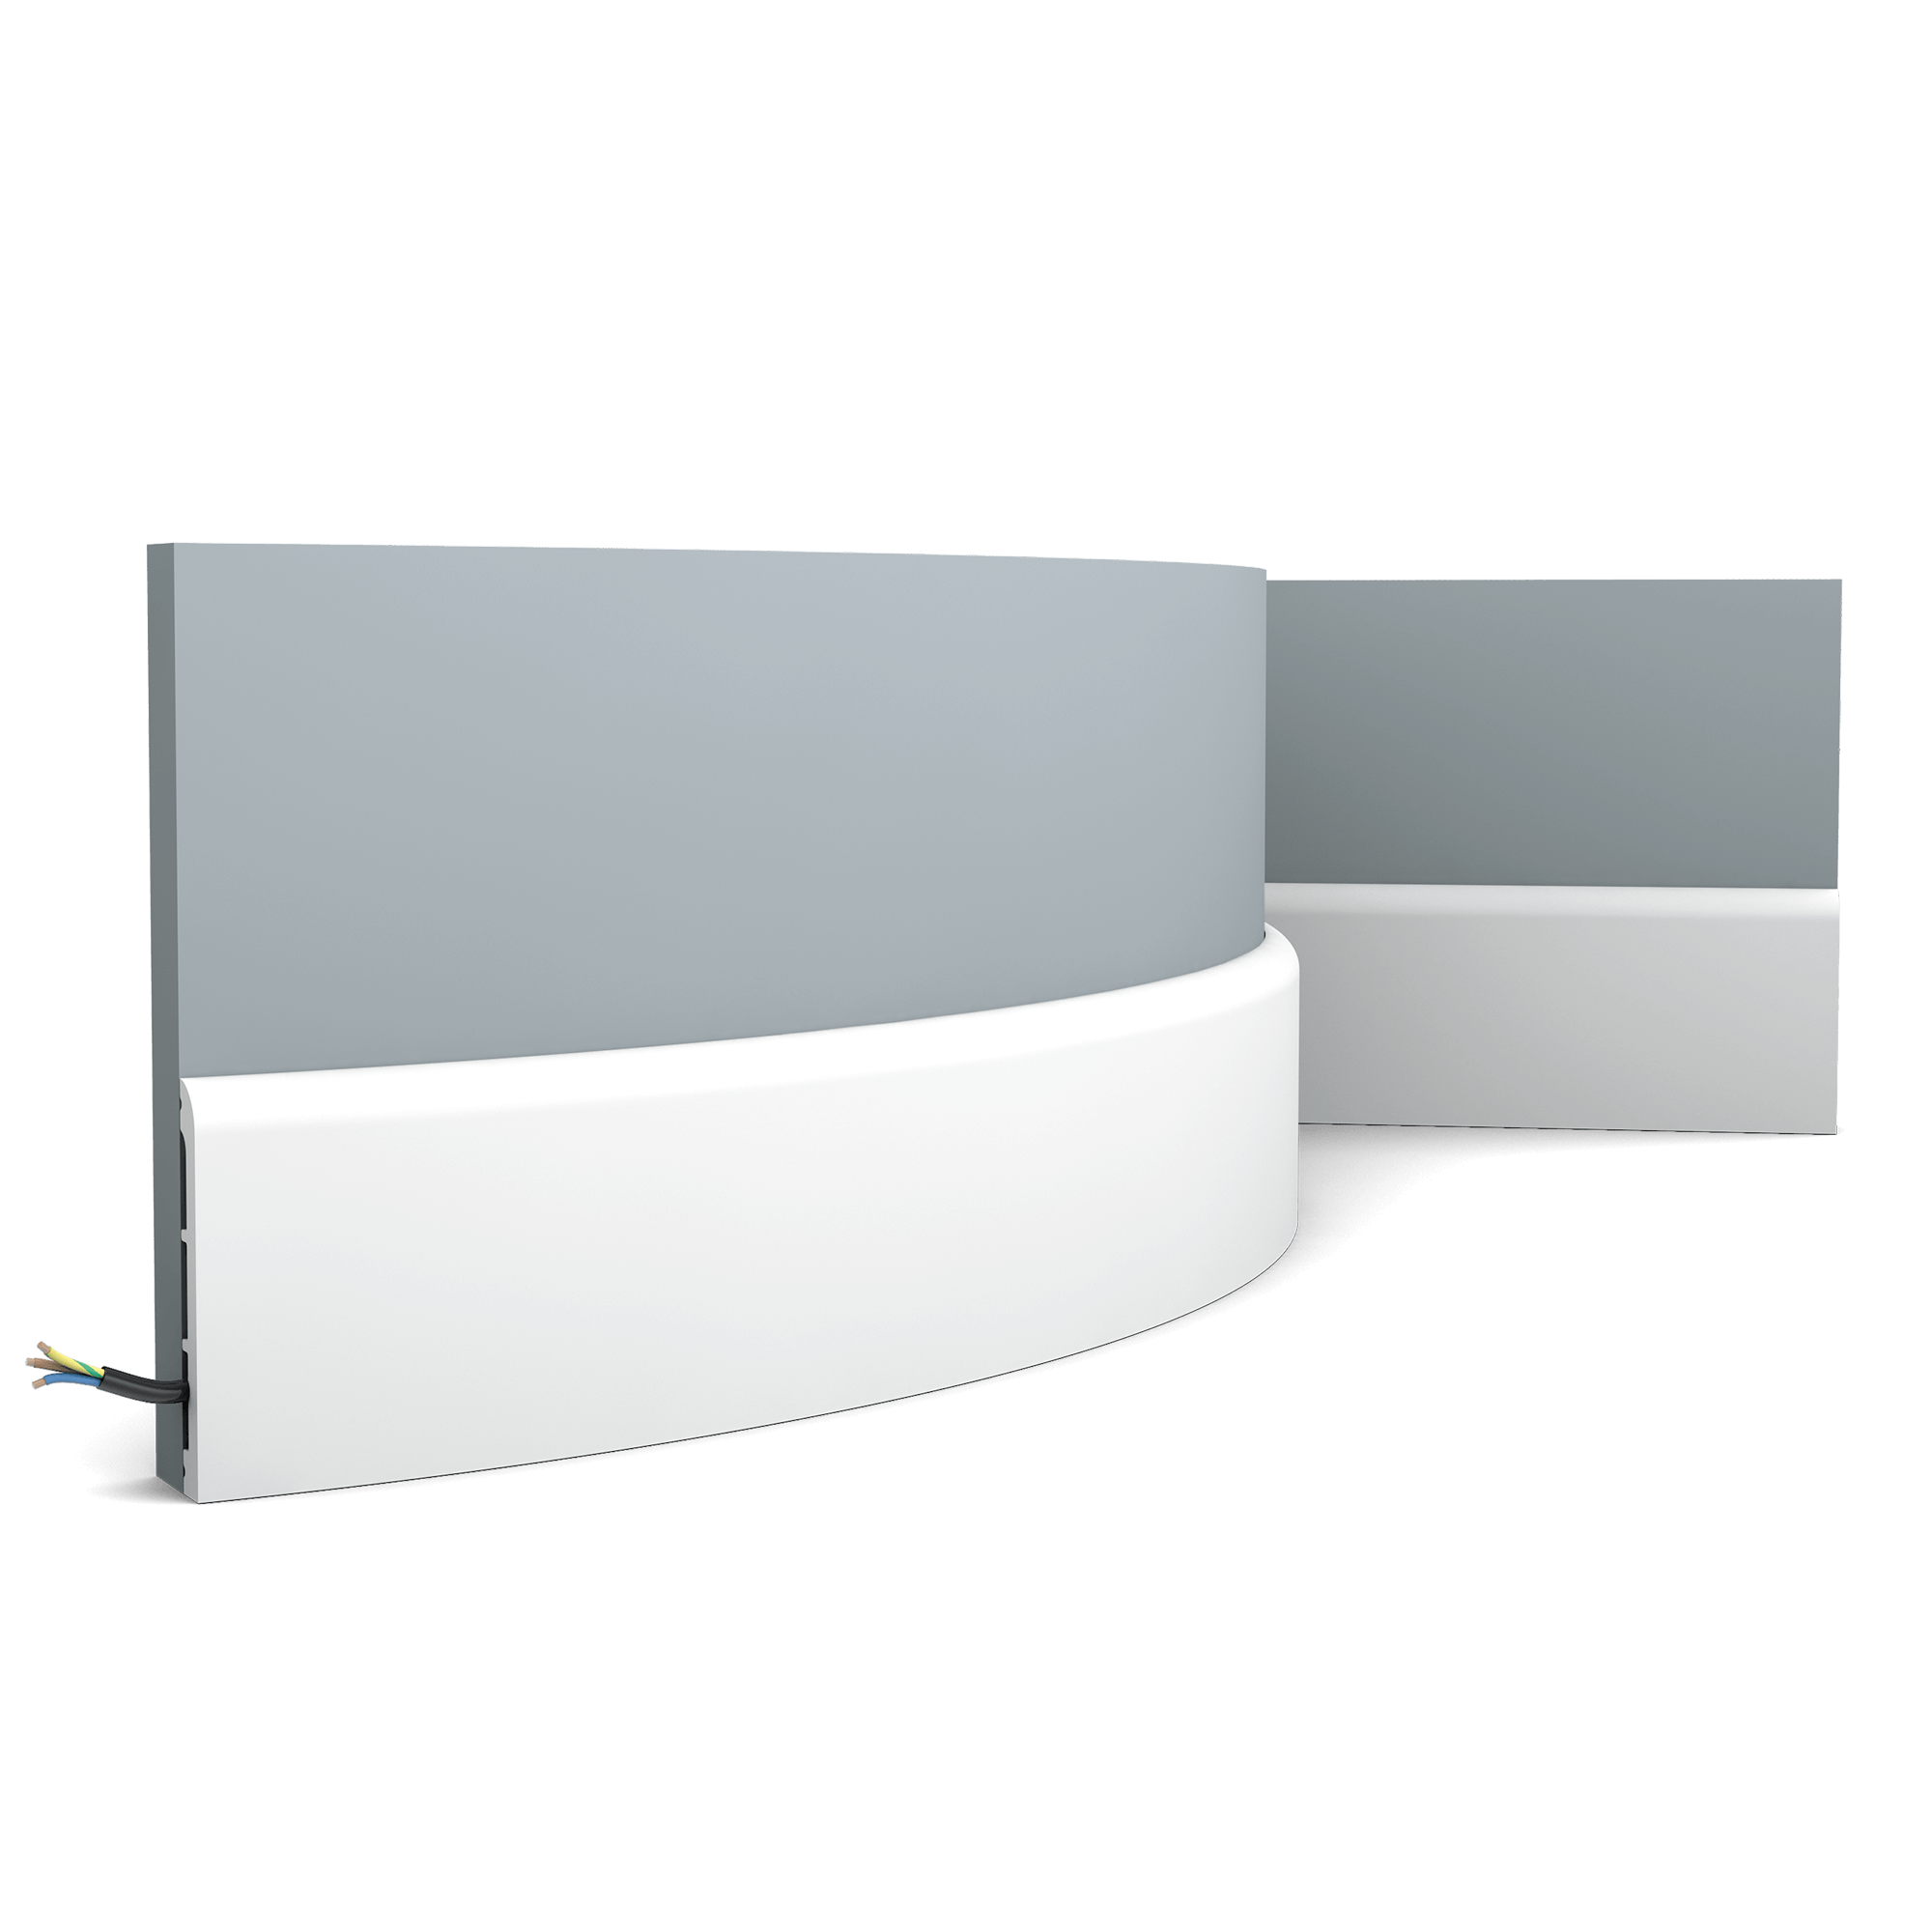 Flexible version of the SX184. This multifunctional skirting board with rounded top provides endless possibilities. Thanks to its Flex technology, curved walls and surfaces are no problem. Installation remark: It is necessary to screw this profile on the wall. Flex Radius: R min = 45 cm